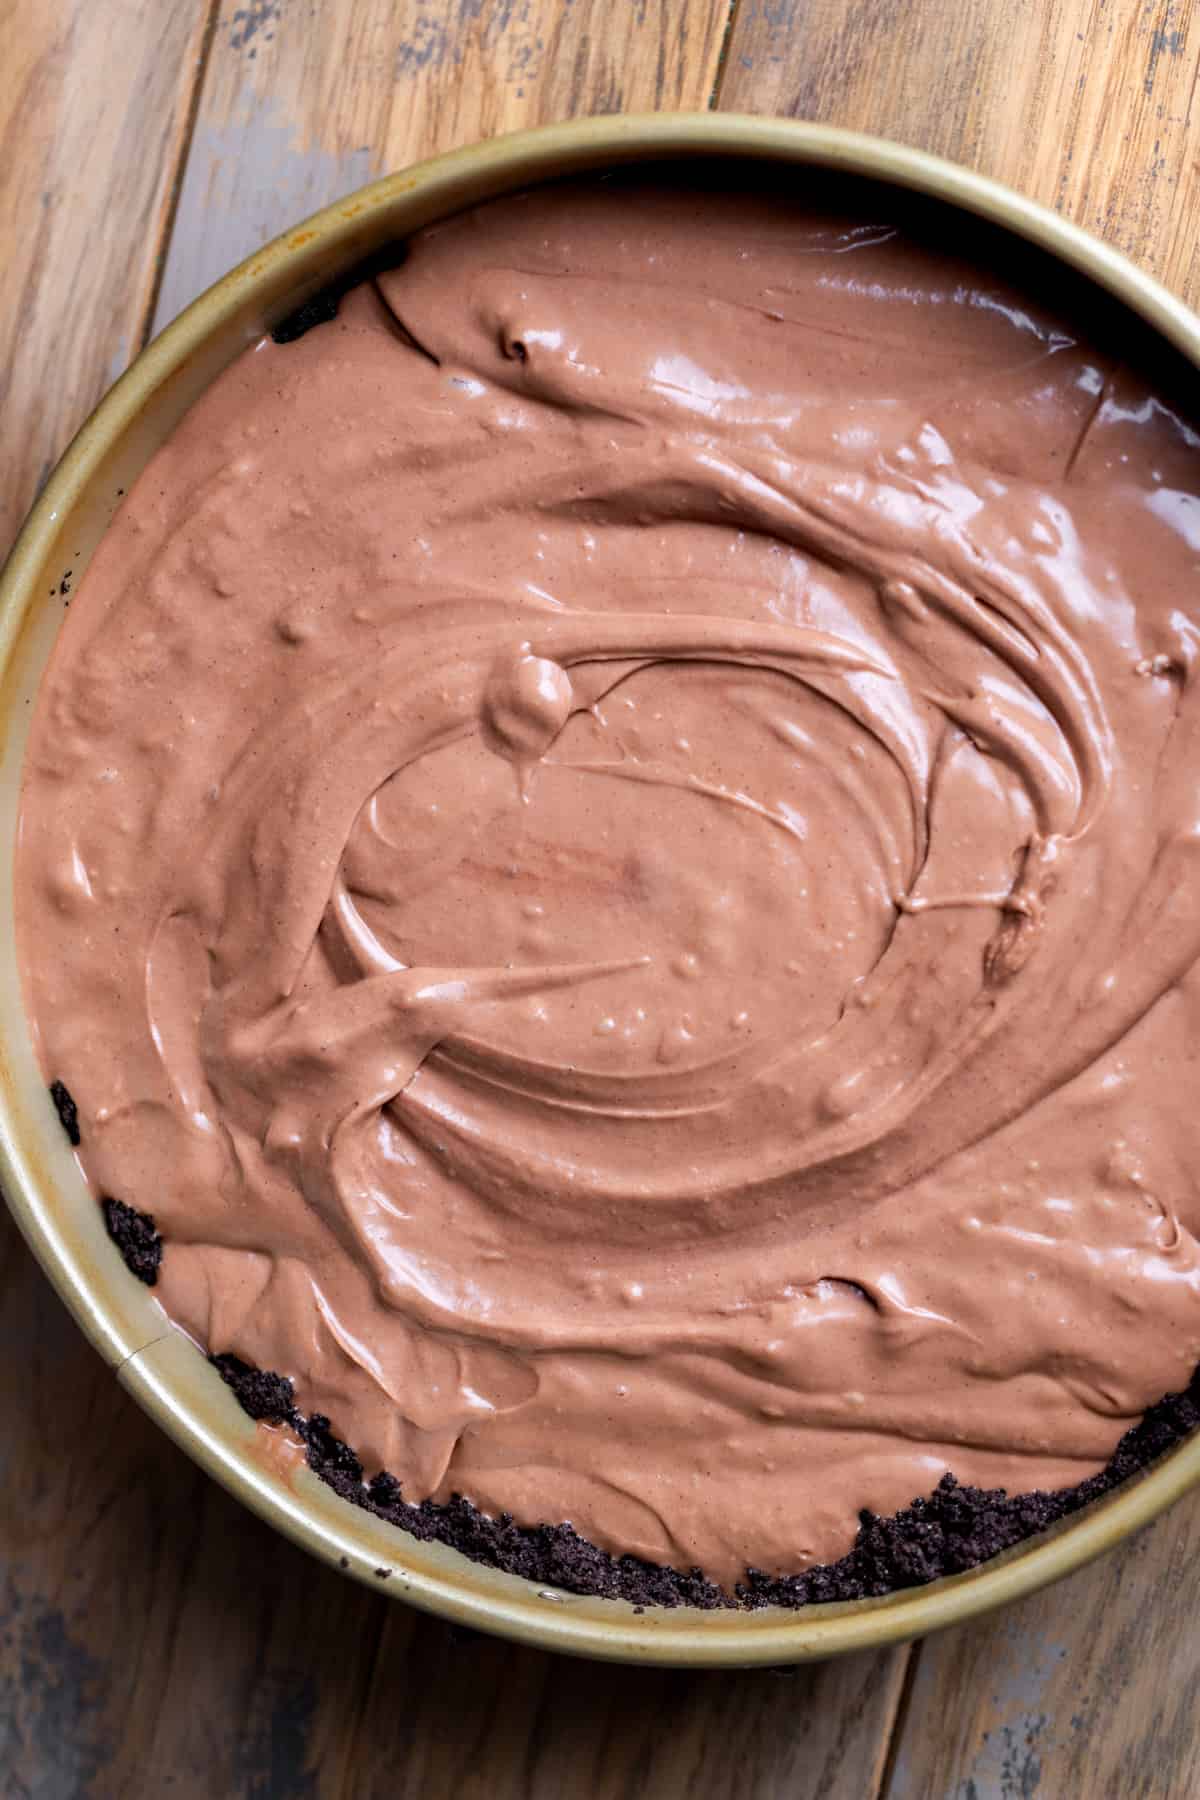 Nutella cheesecake batter in the pan.